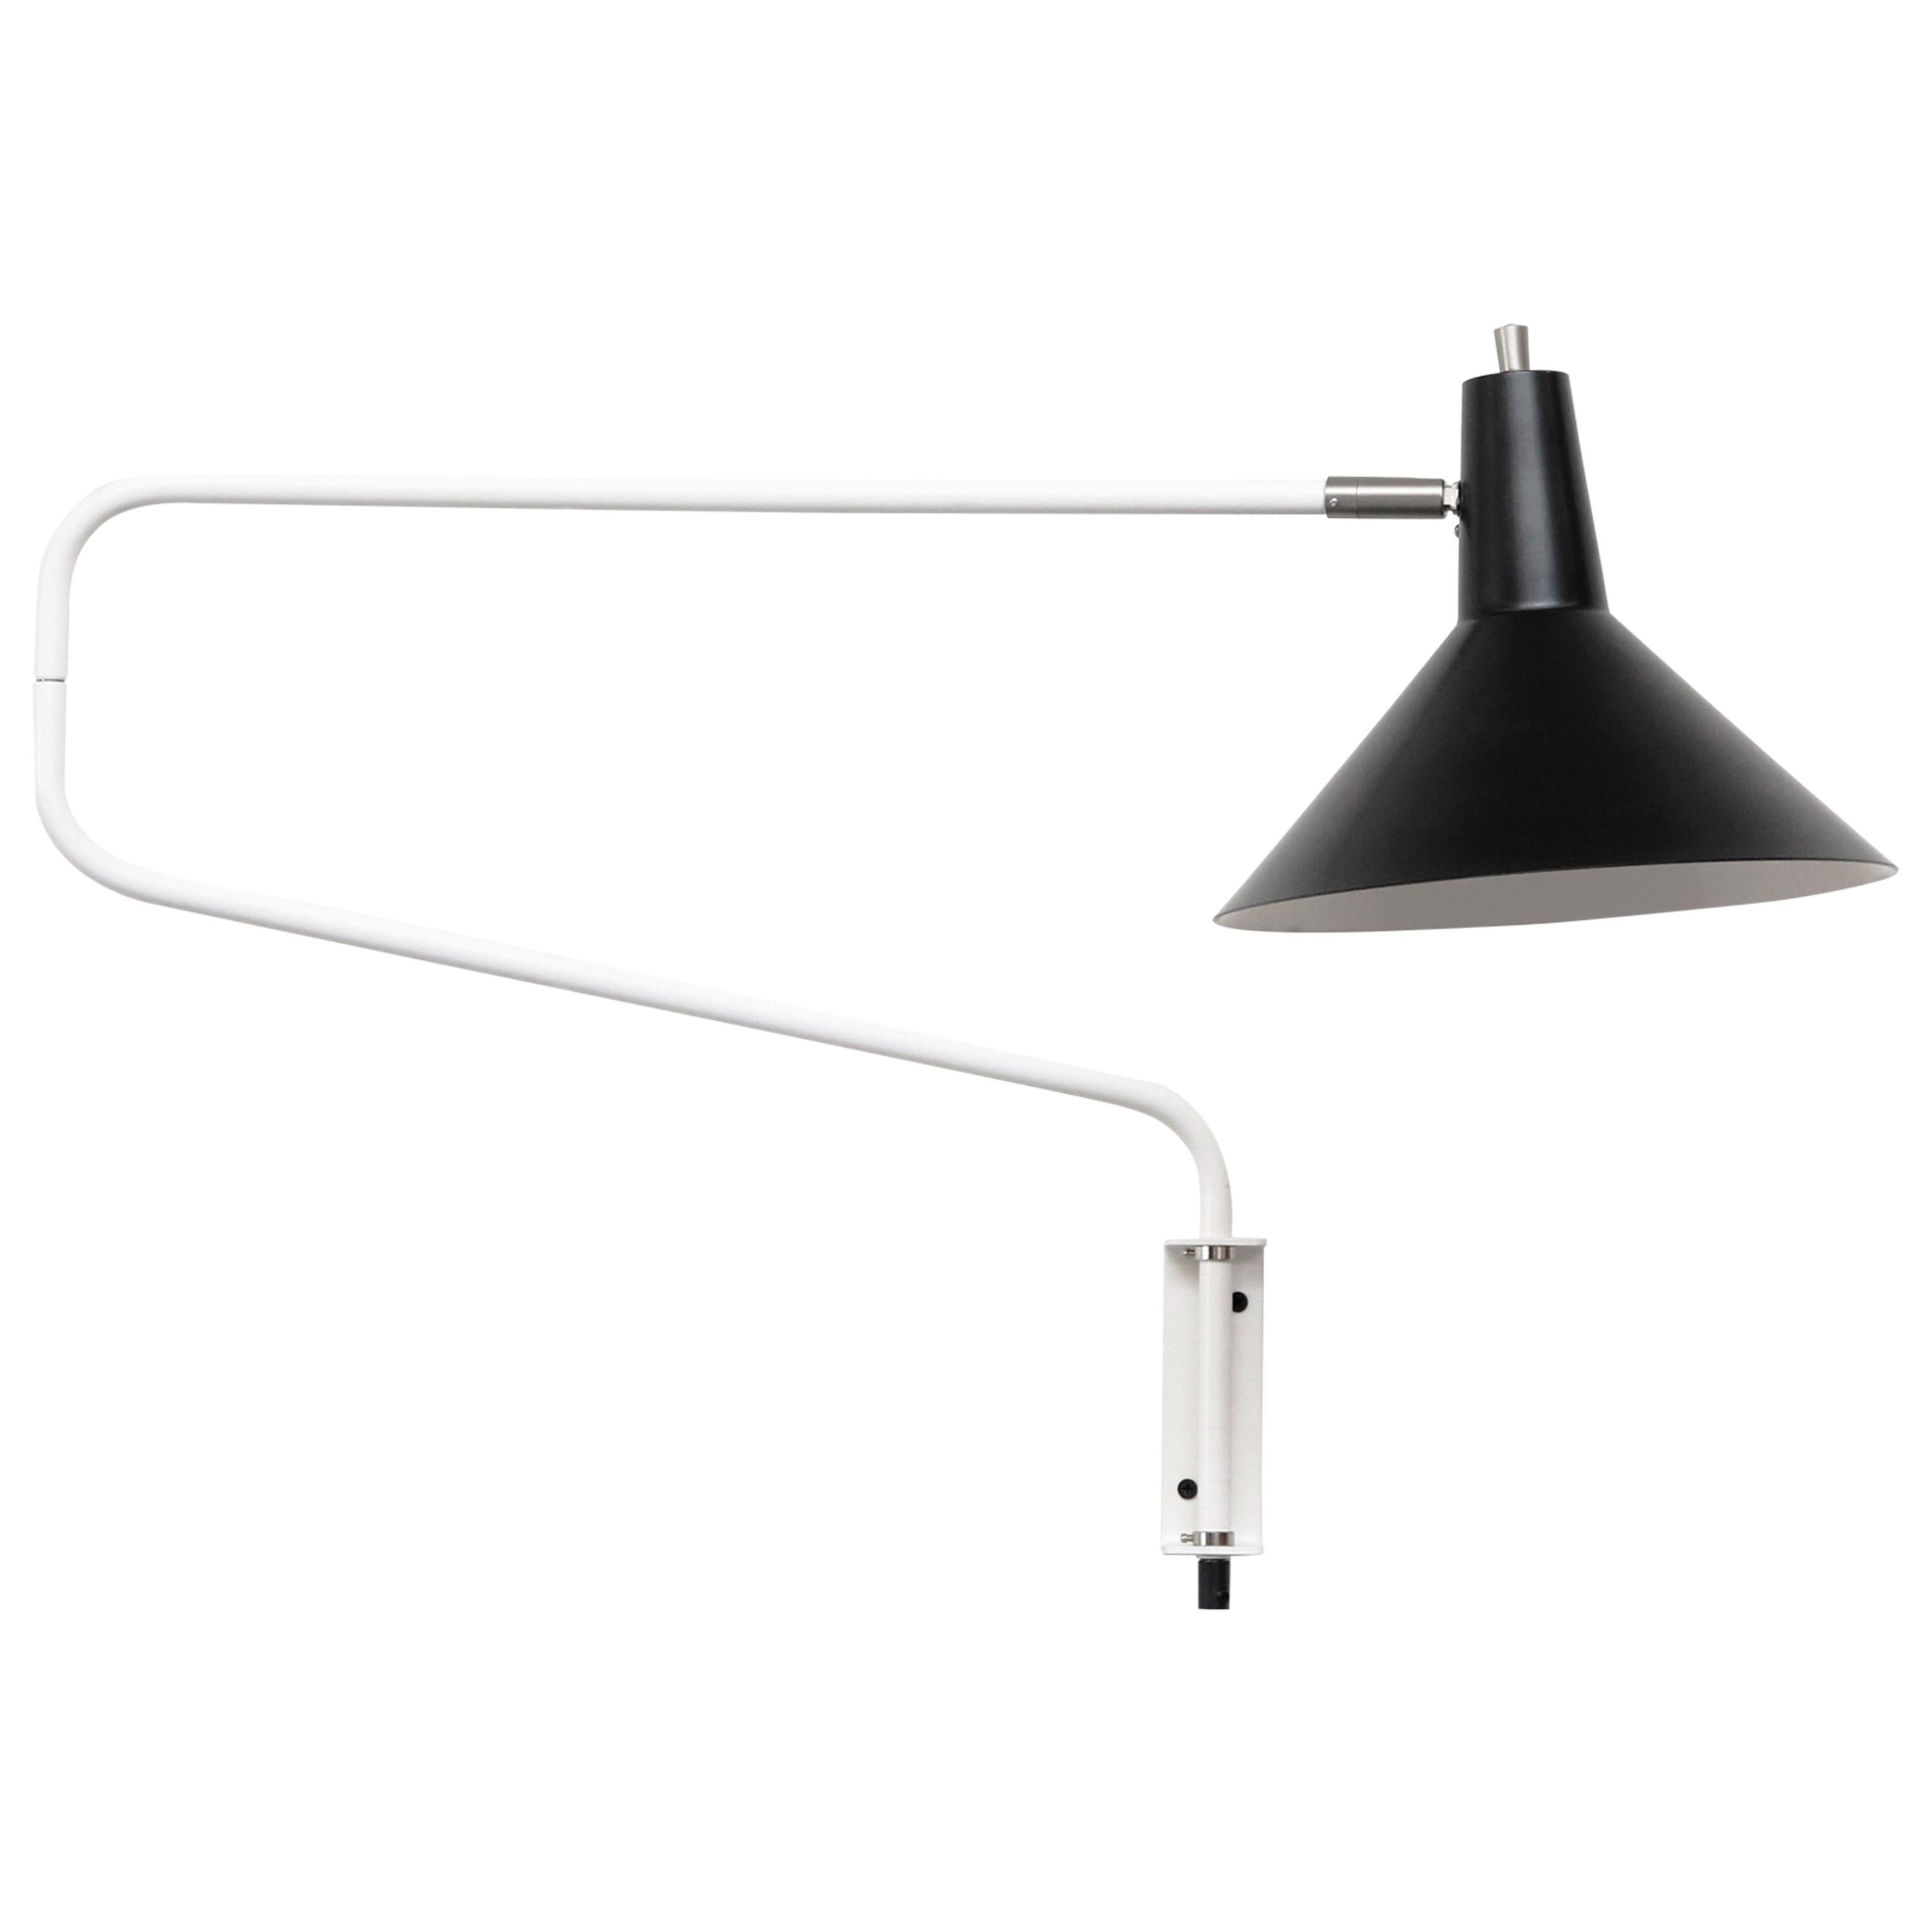 Anvia 'The Paper Clip' Swinging Wall Lamp in Black & White by Jan Hoogervorst